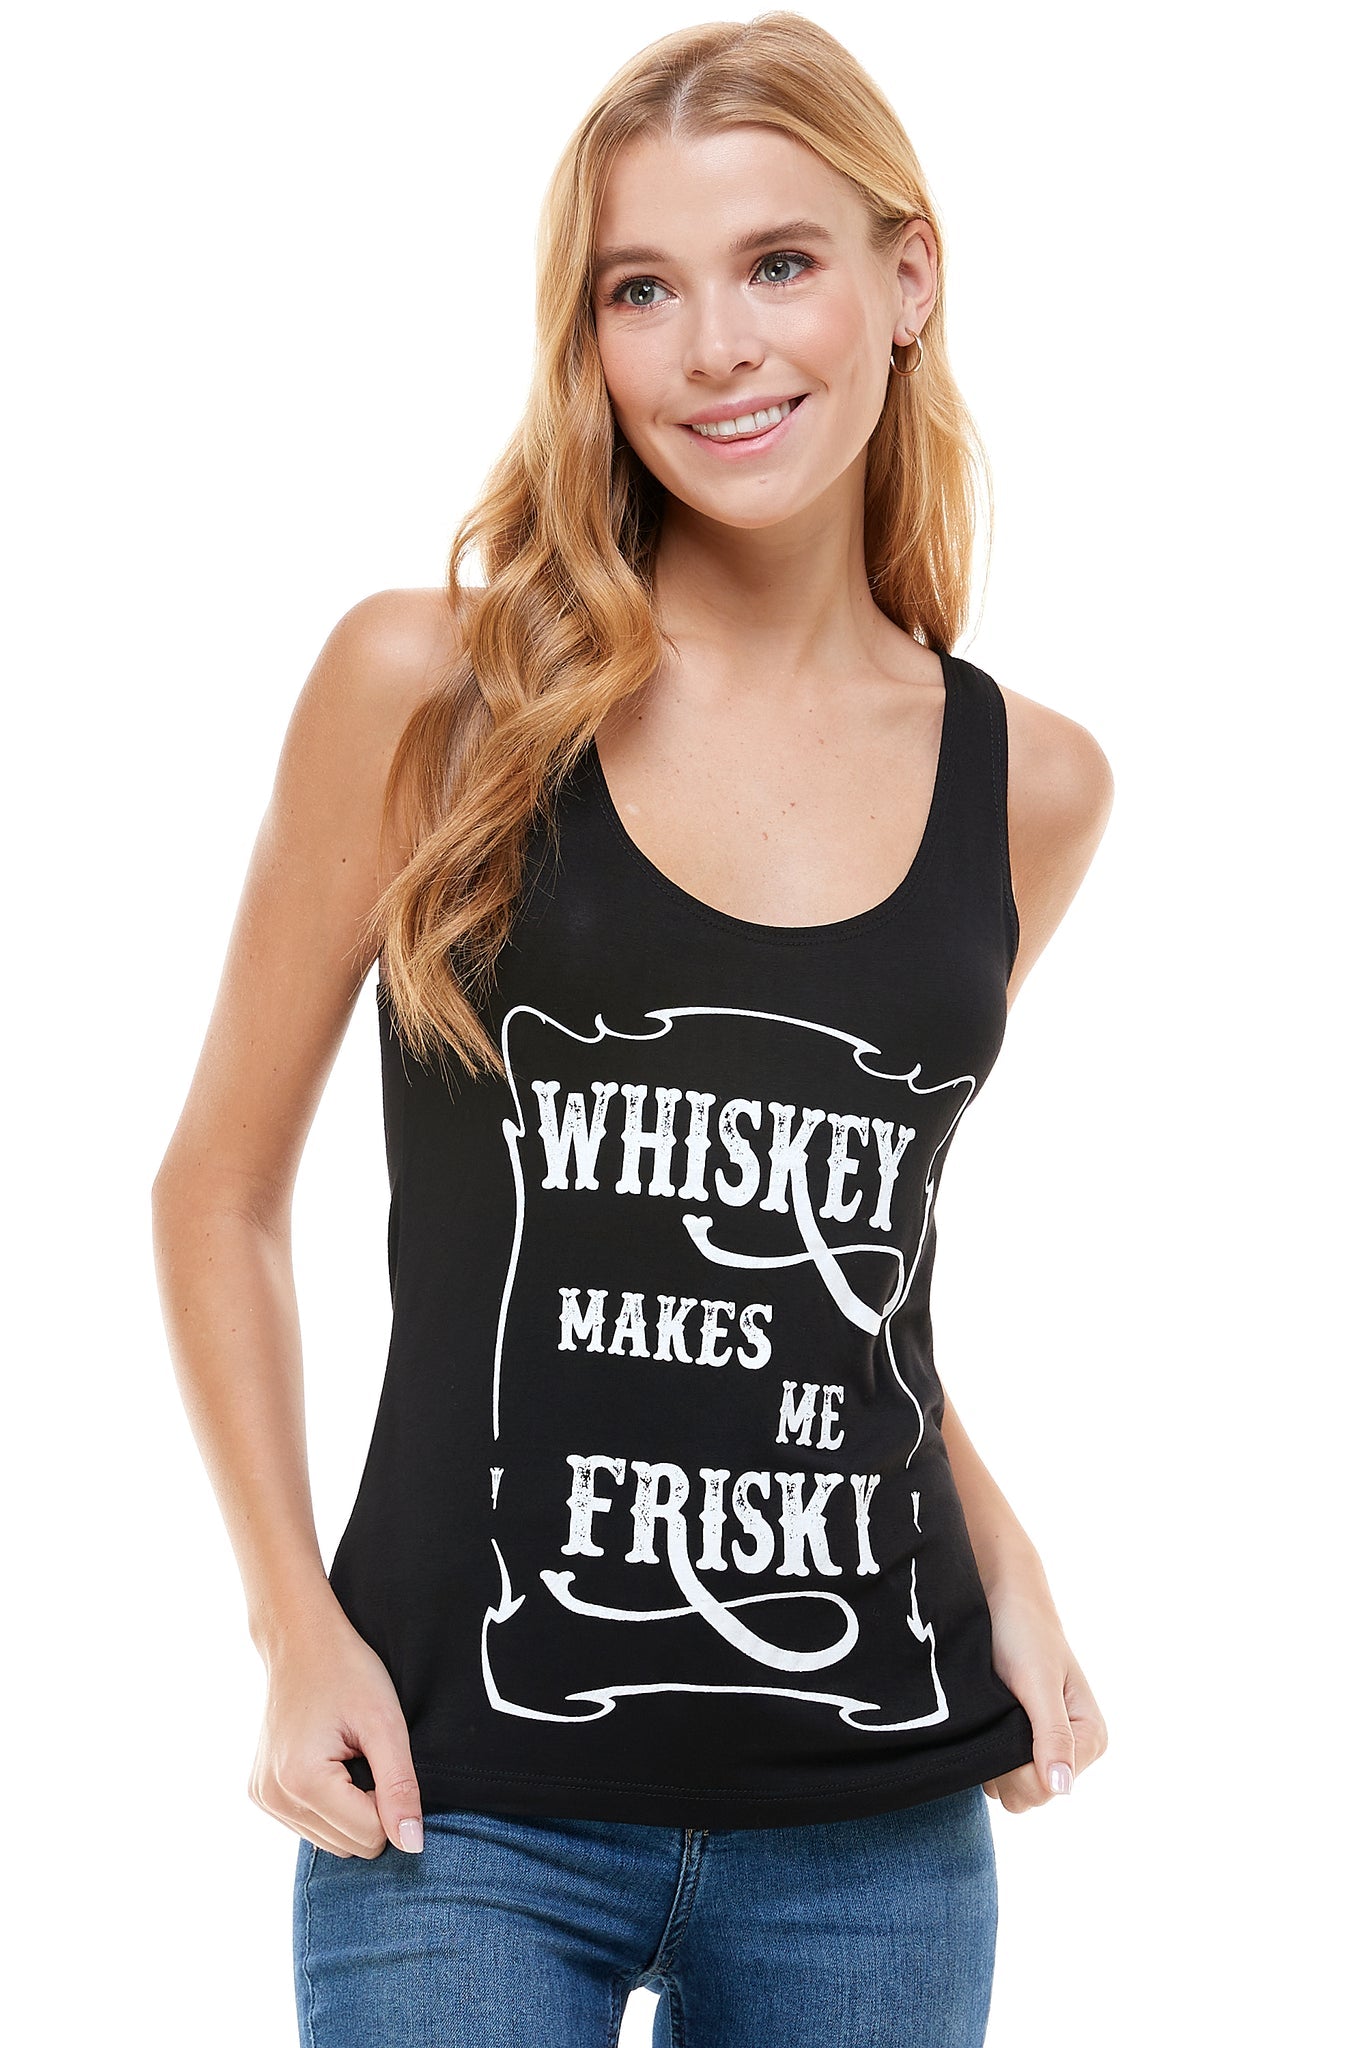 Whiskey Makes Me Frisky Tank - and, ATTITUDE, COUNTRY, countrystrong, COWGIRL, drinking, flag, GIRL, HOWDY, lips, love, moonshine, music, patriotic, peace, PLUS, rock, rocker, RODEO, roll, shine, SIZE, strong, SUMMER, TANK, TOP, WESTERN - Shirts & Tops - Baha Ranch Western Wear